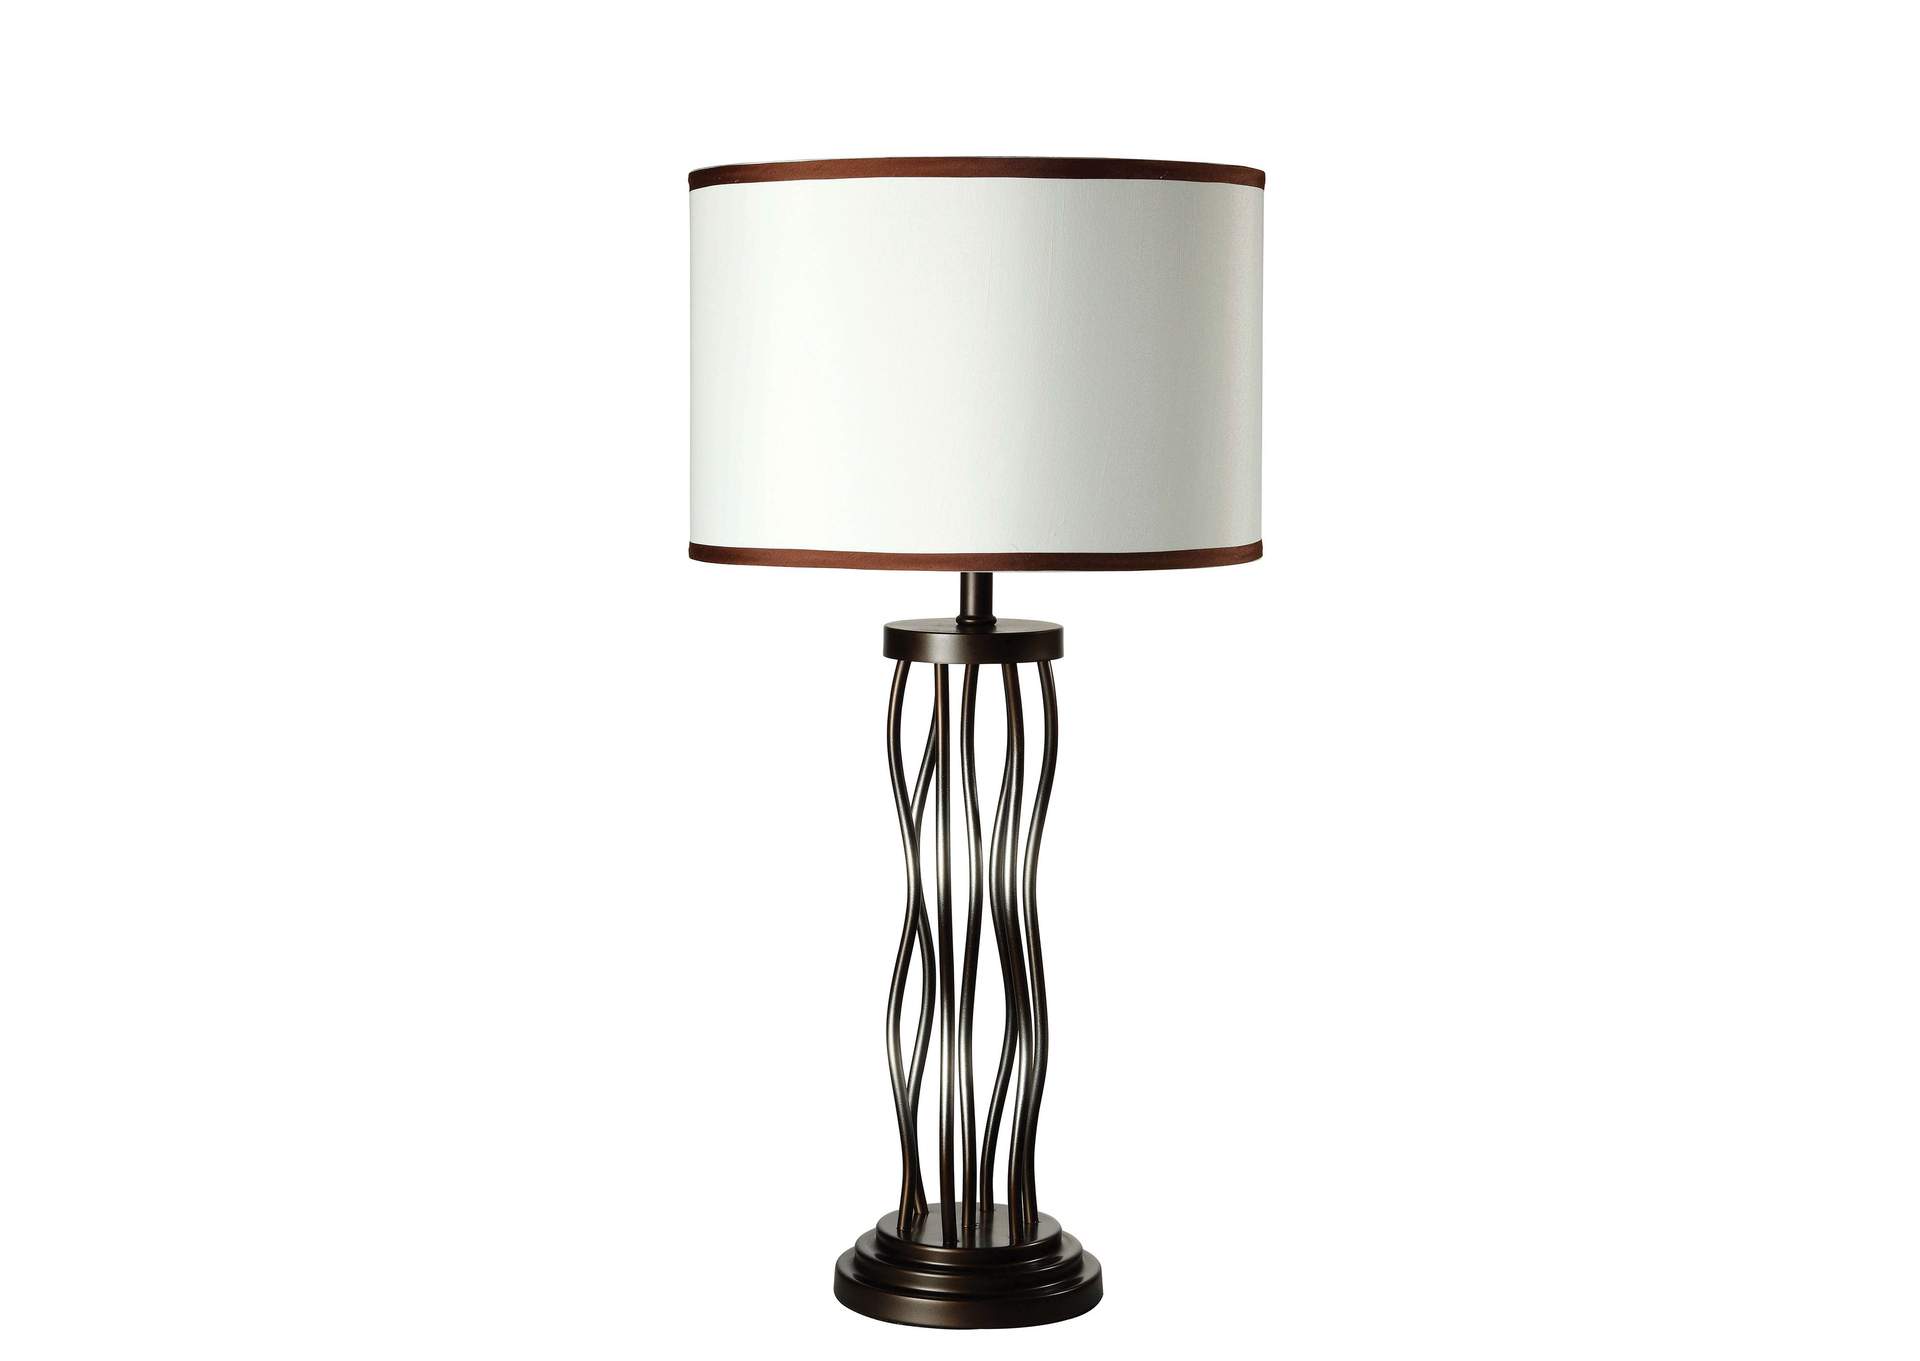 Jared Table lamp (2pc),Acme